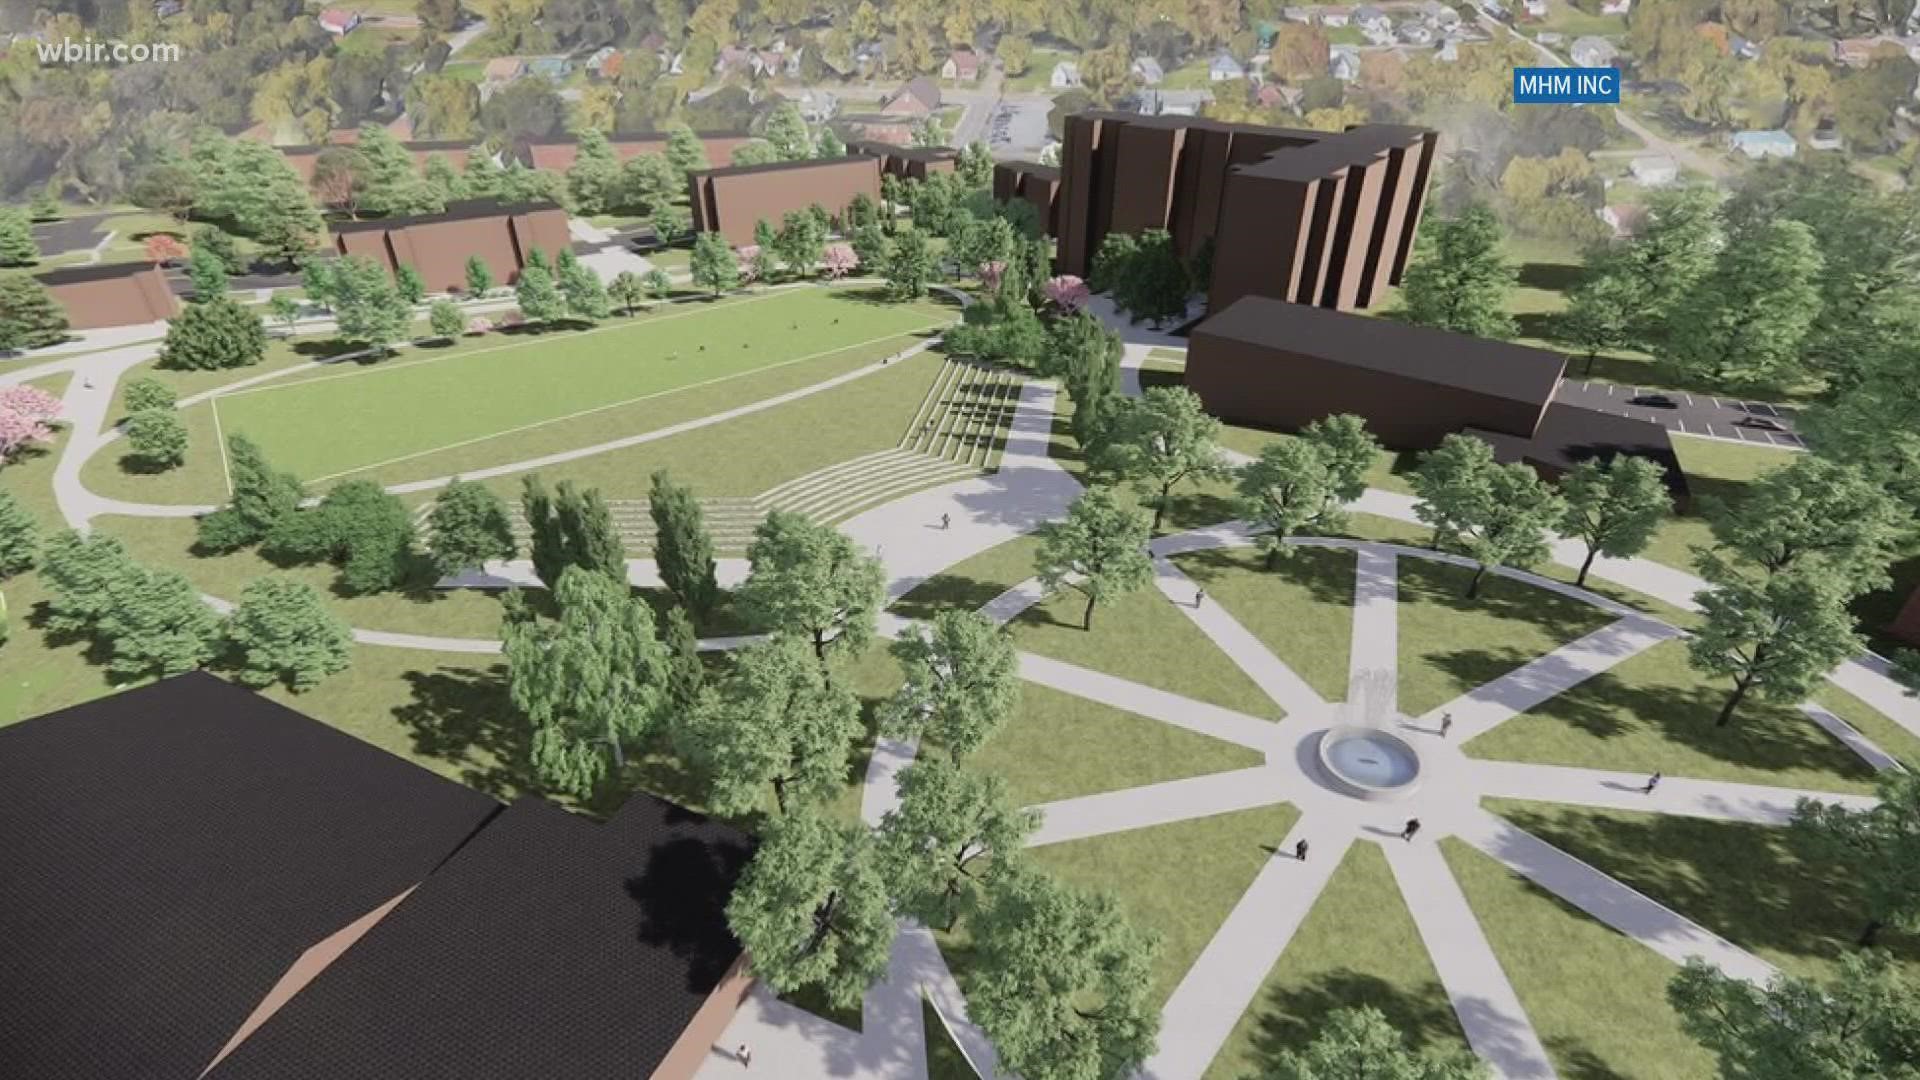 Part of the new plan would be developing eleven acres of affordable housing near the campus.